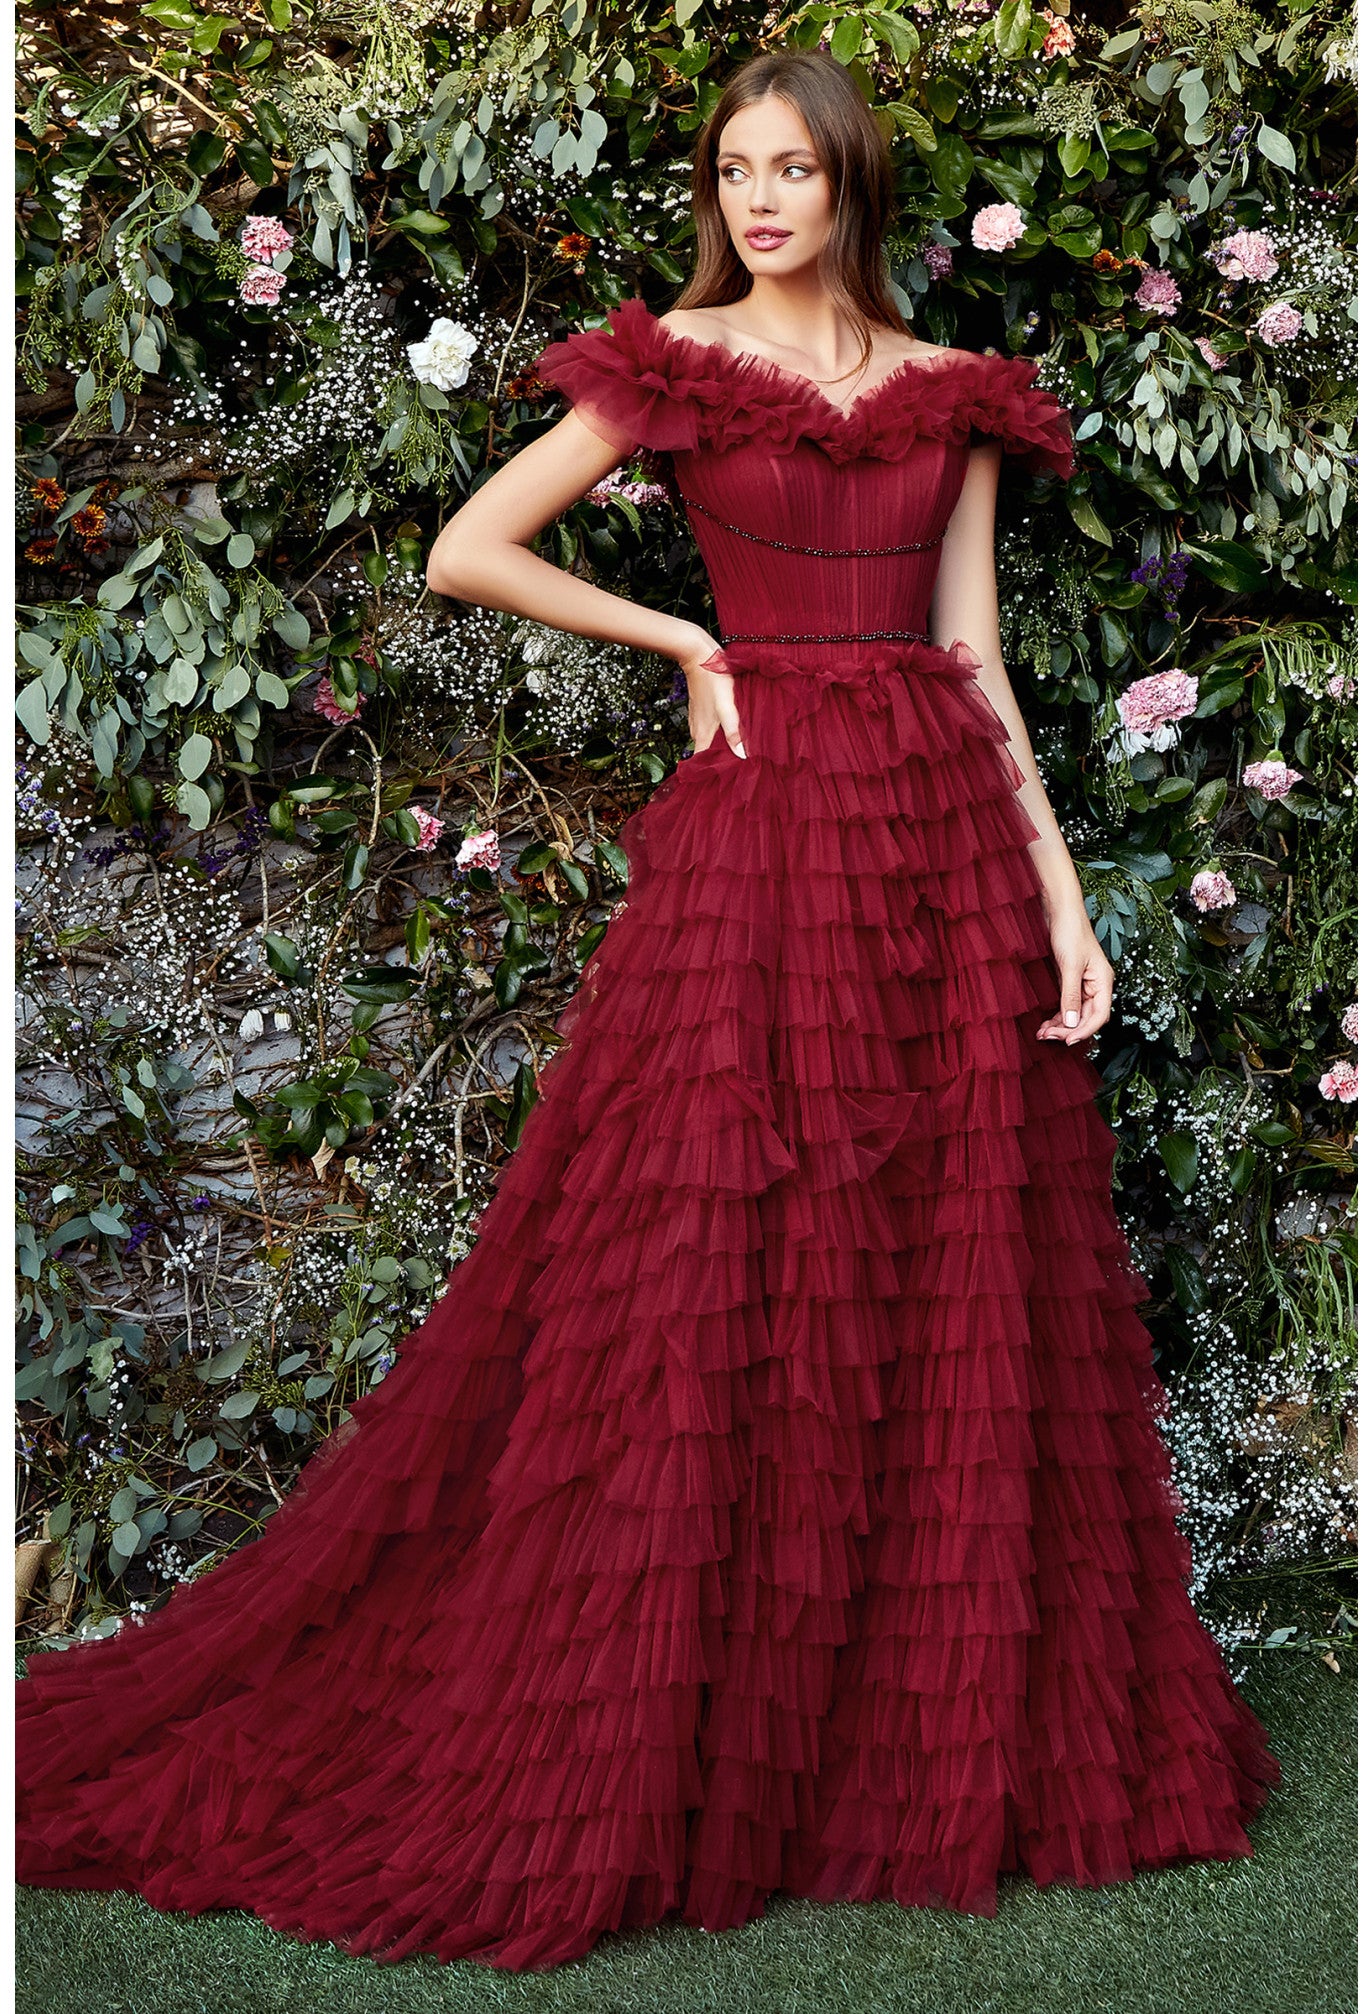 Spectacular red-carpet style Red ruffle gown